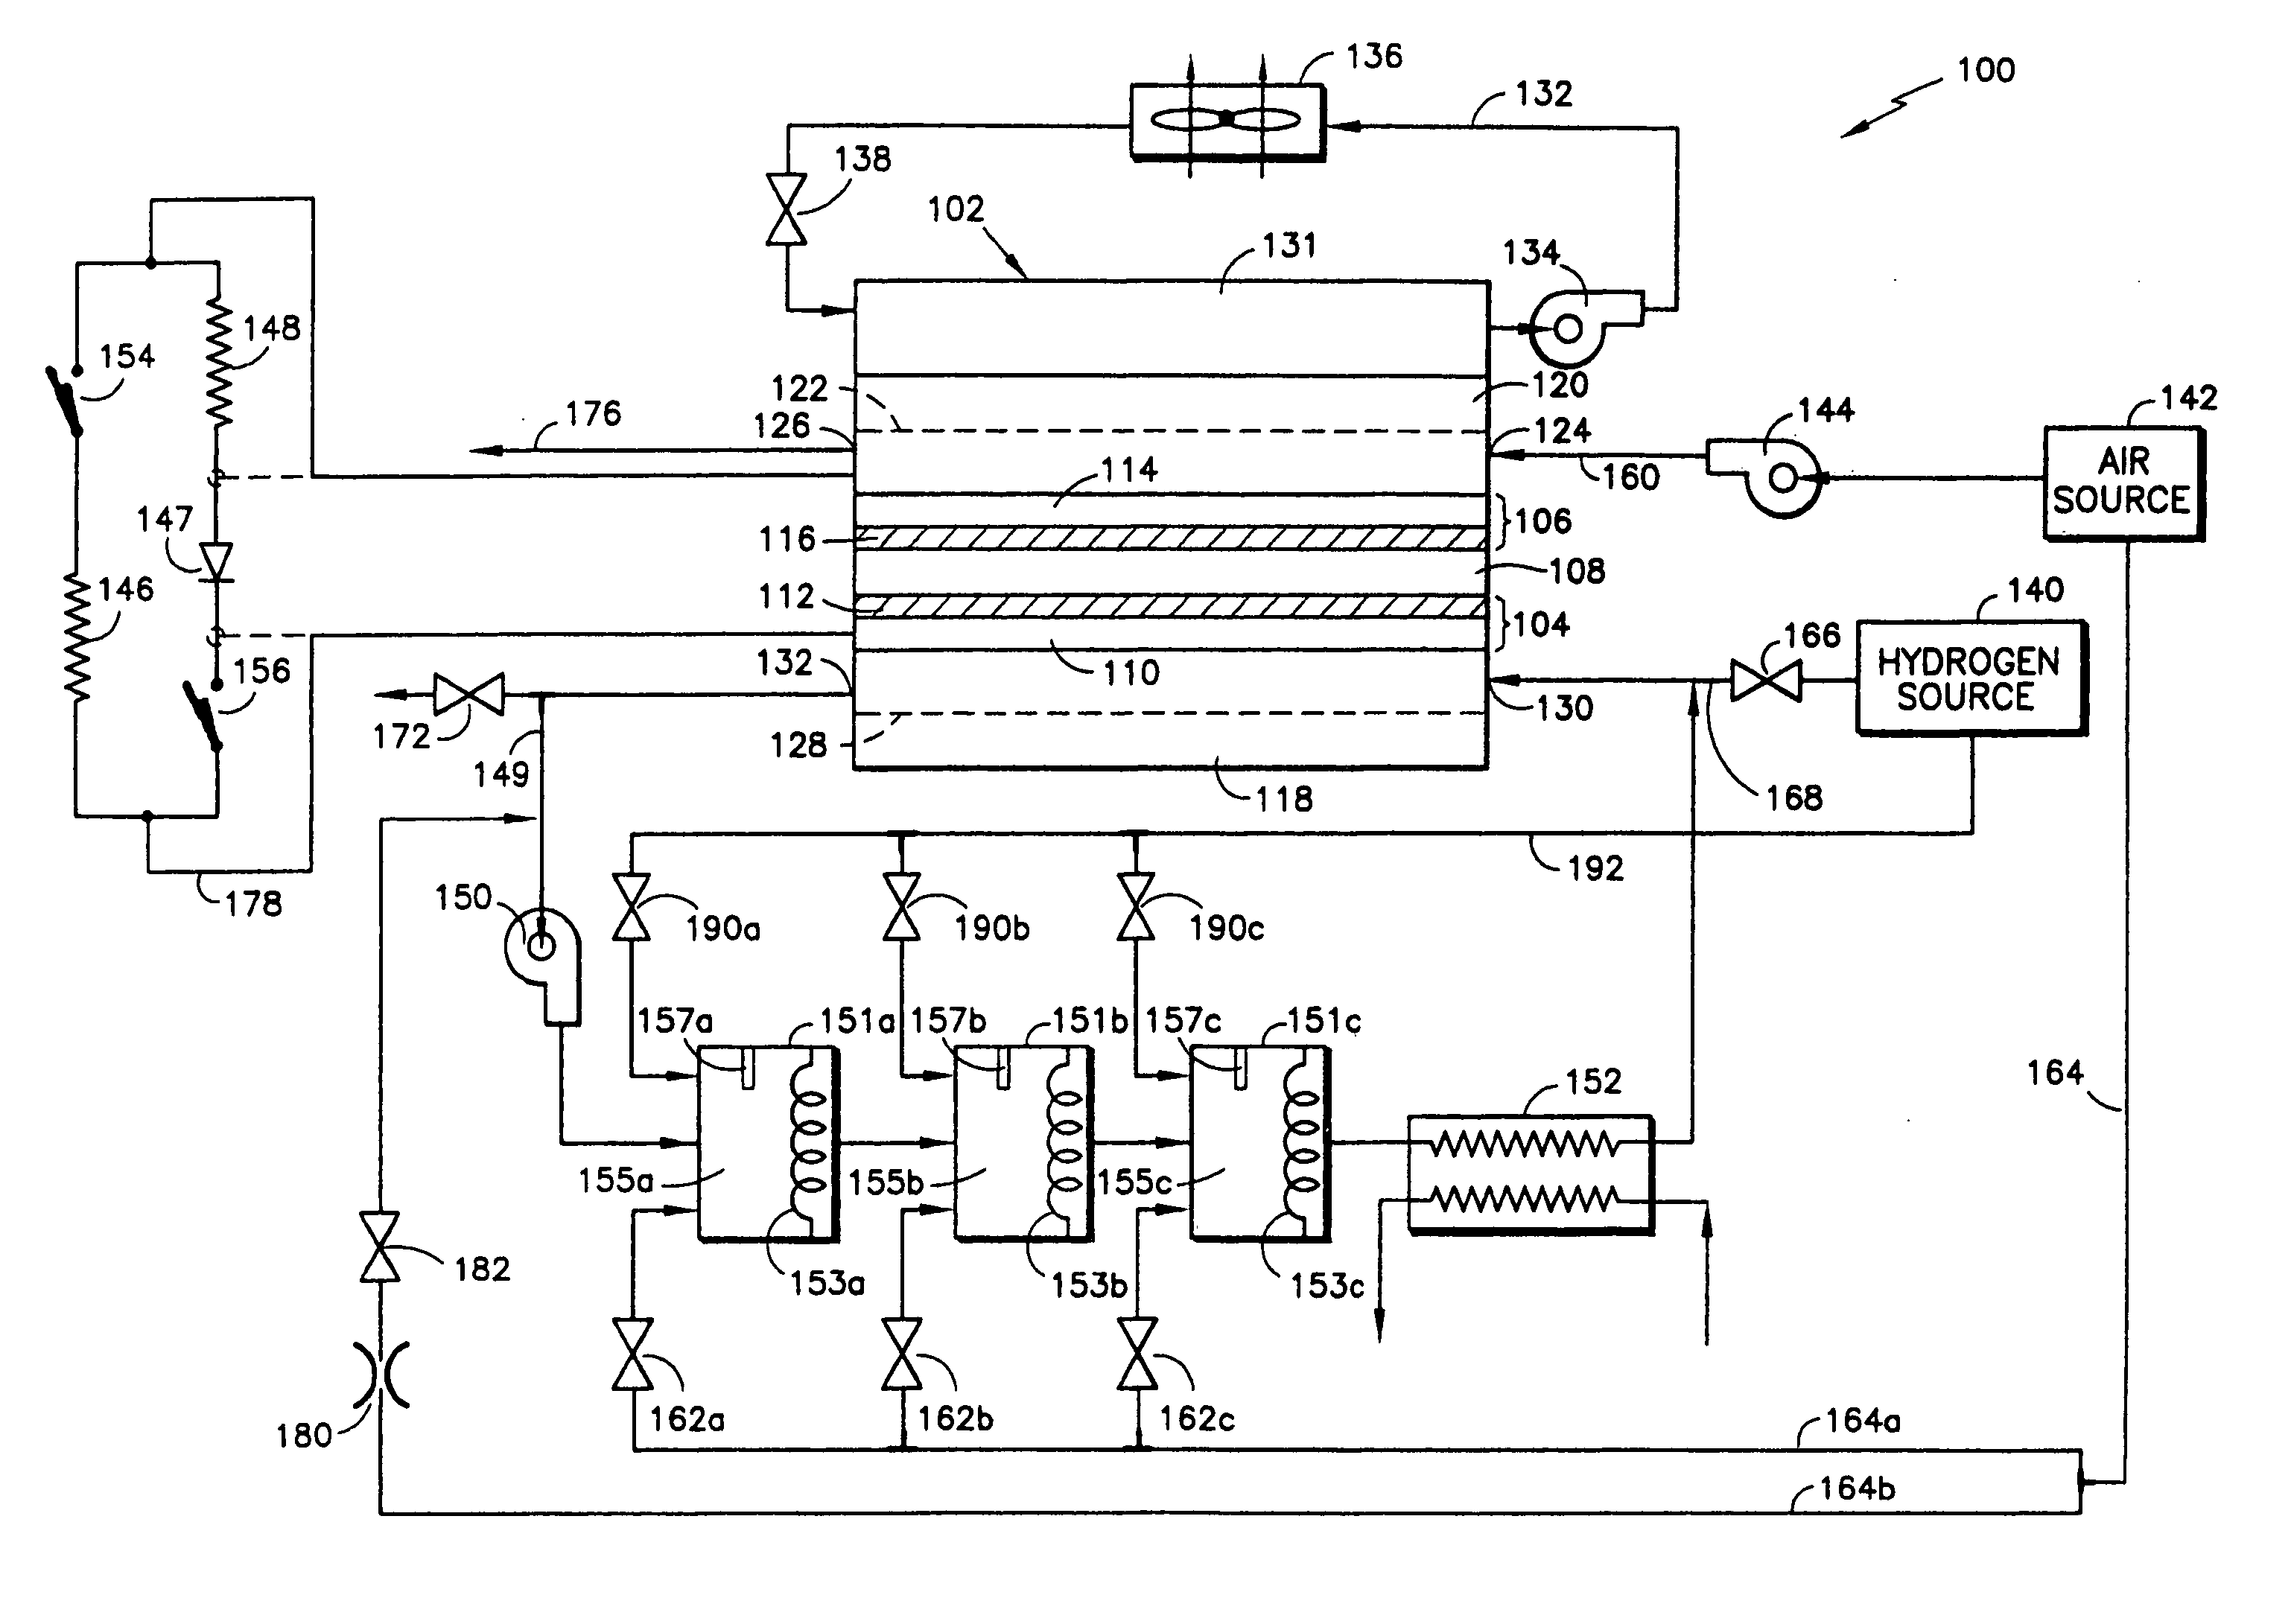 Procedure for starting up a fuel cell system having an anode exhaust recycle loop